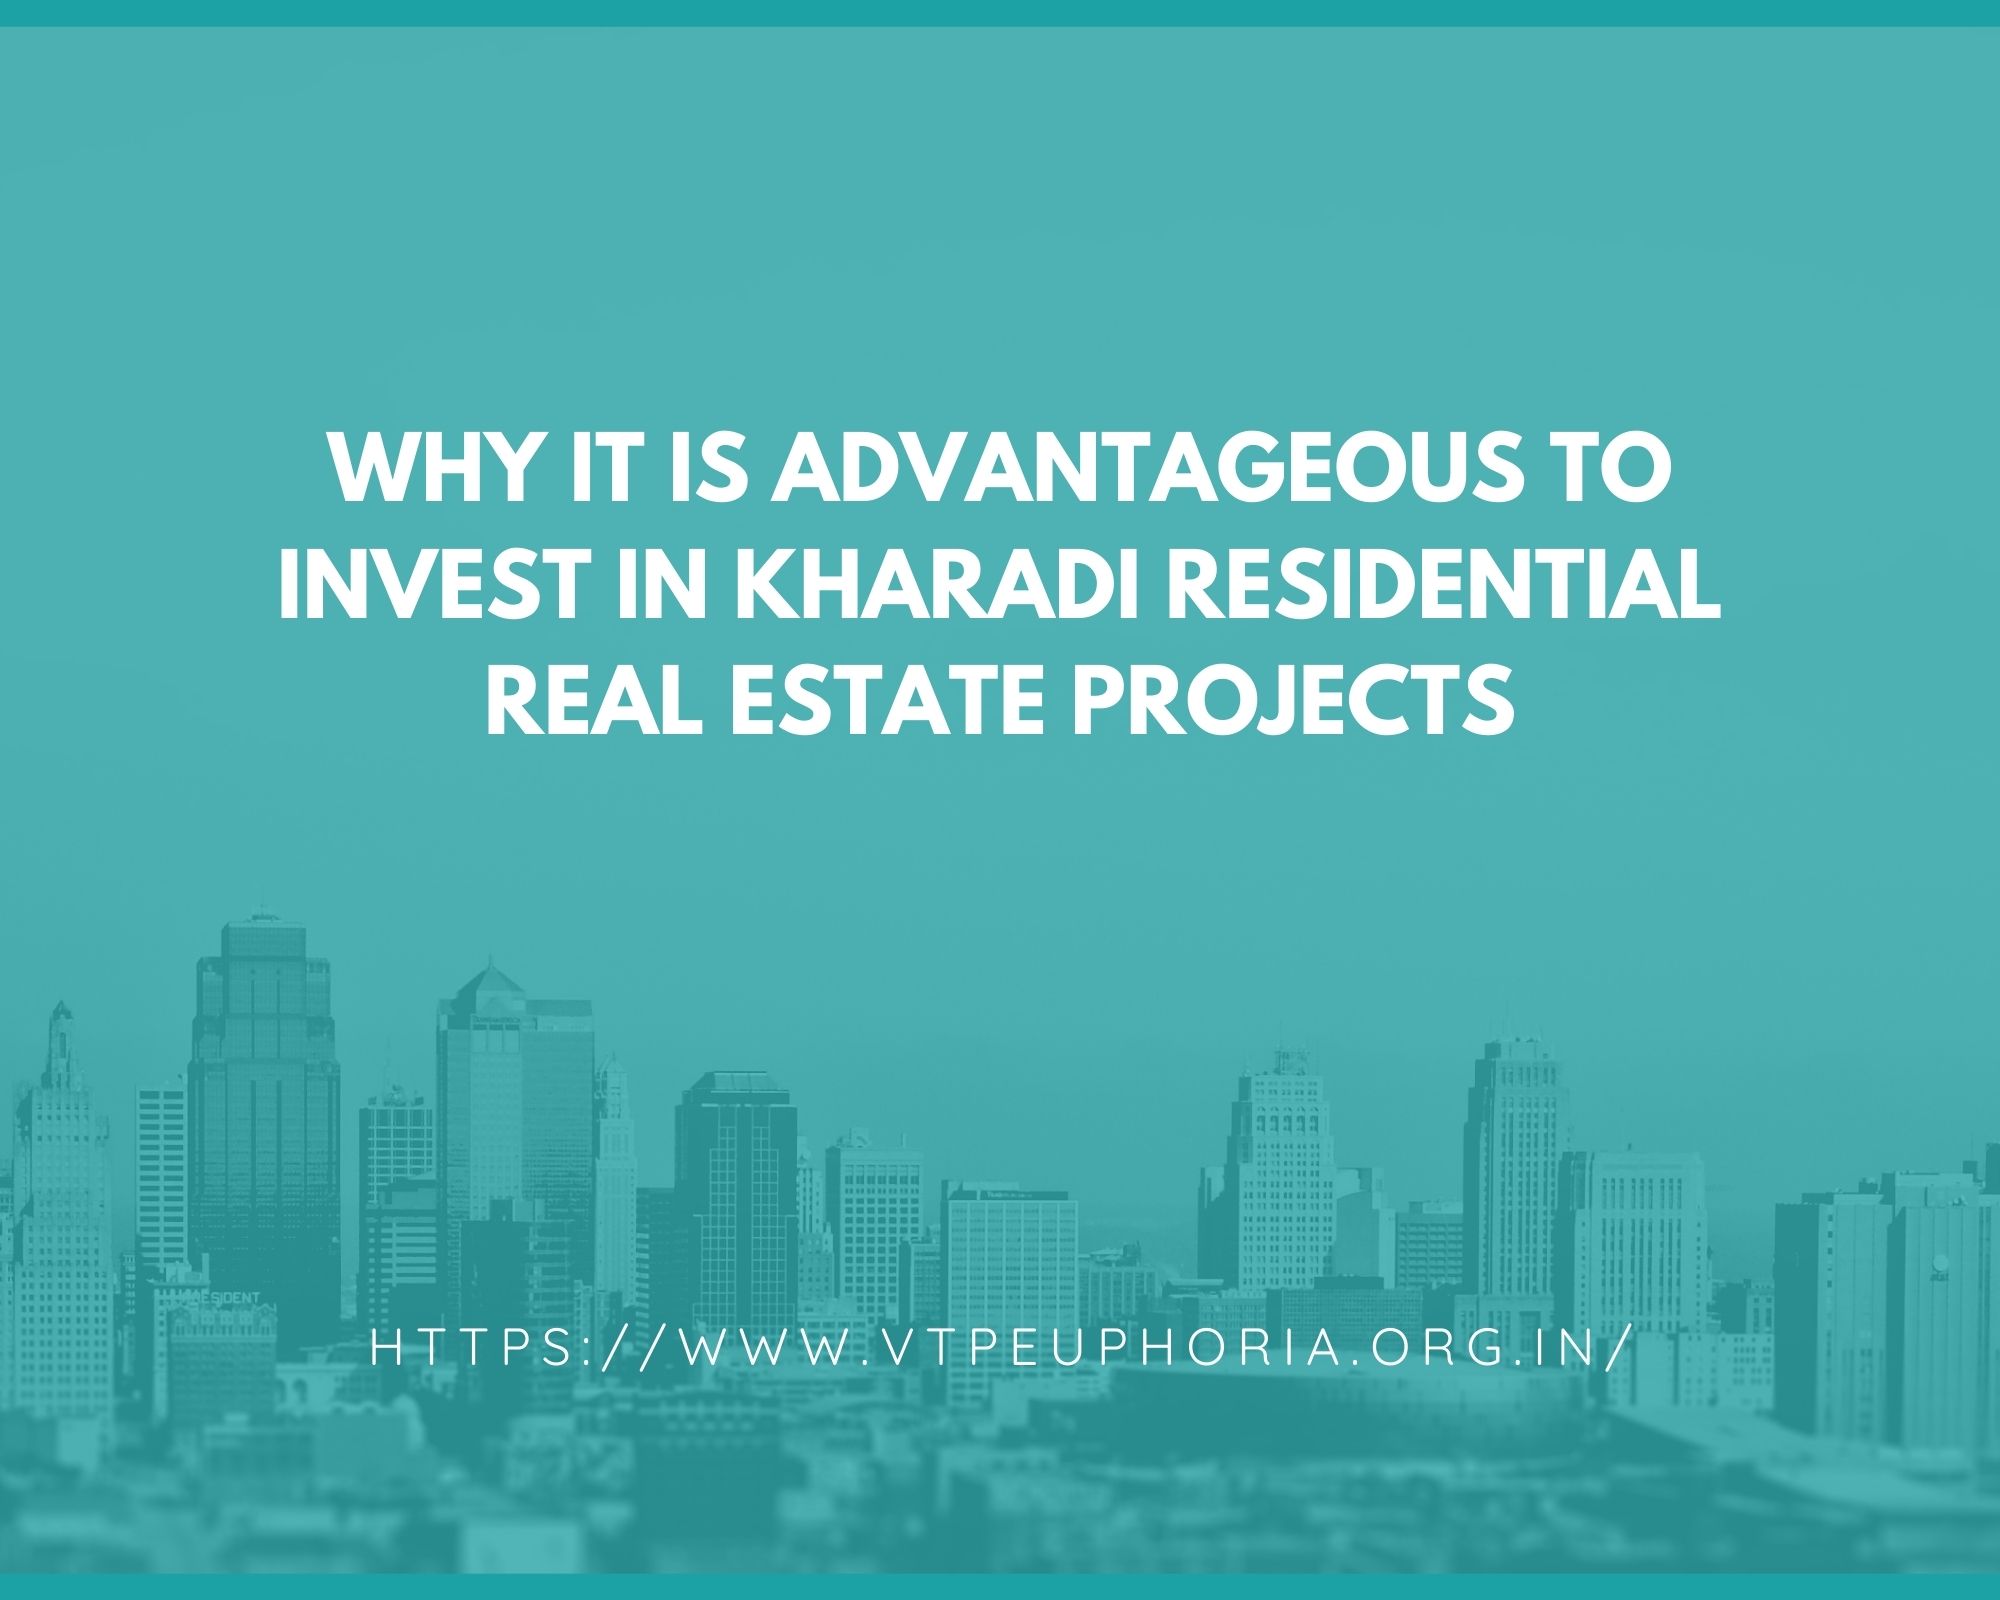 Why It Is Advantageous To Invest In Kharadi Residential Real Estate Projects